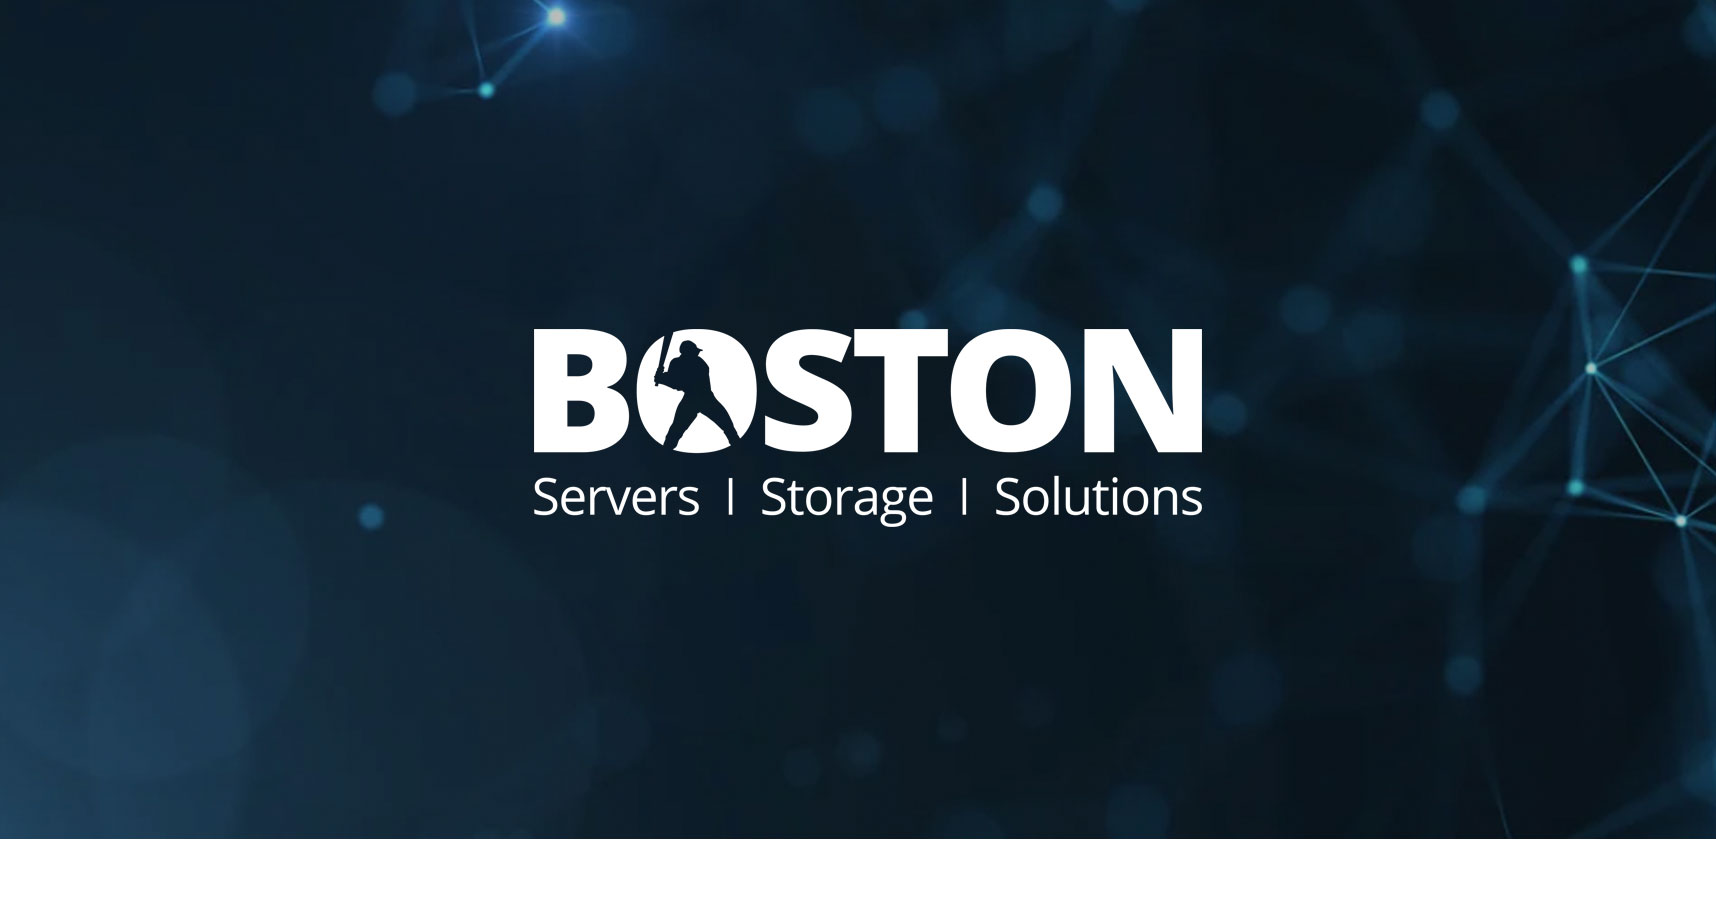 Boston Launched the Igloo AI+ Powered by PEAK:AIO at Supercomputer 2023